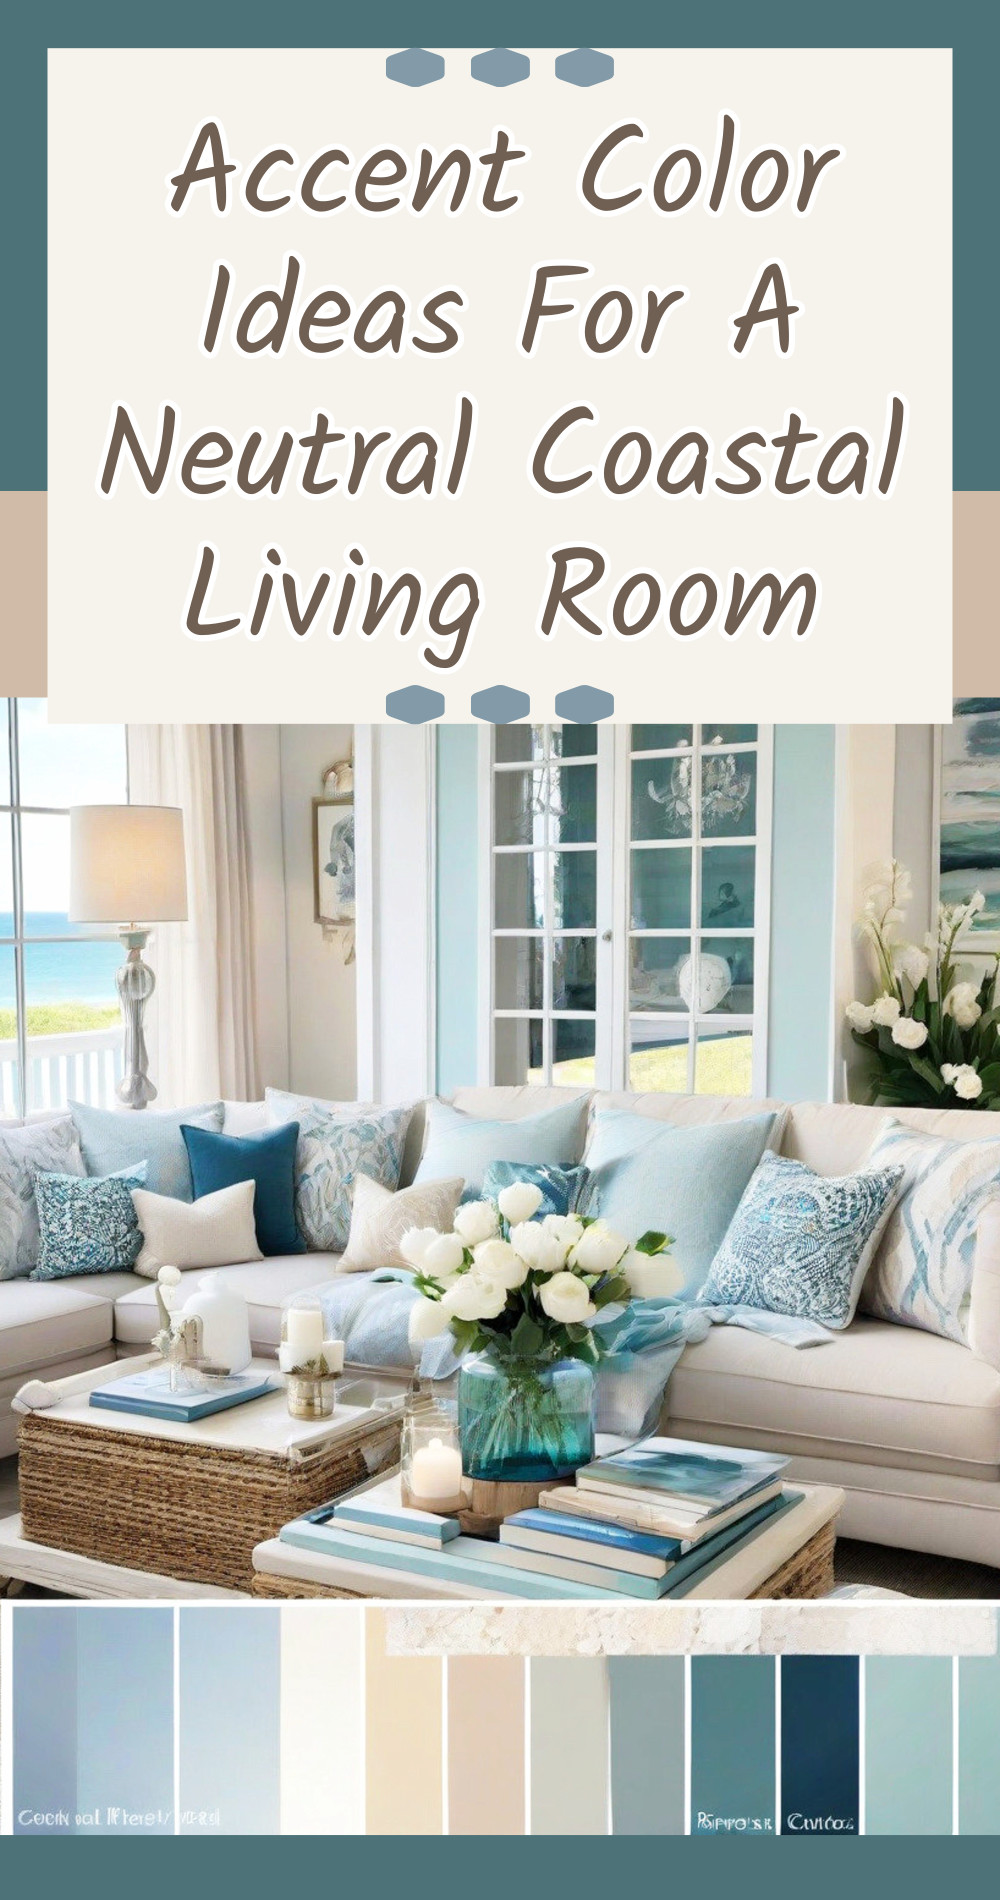 Accent Color Ideas For Neutral Coastal Living Room